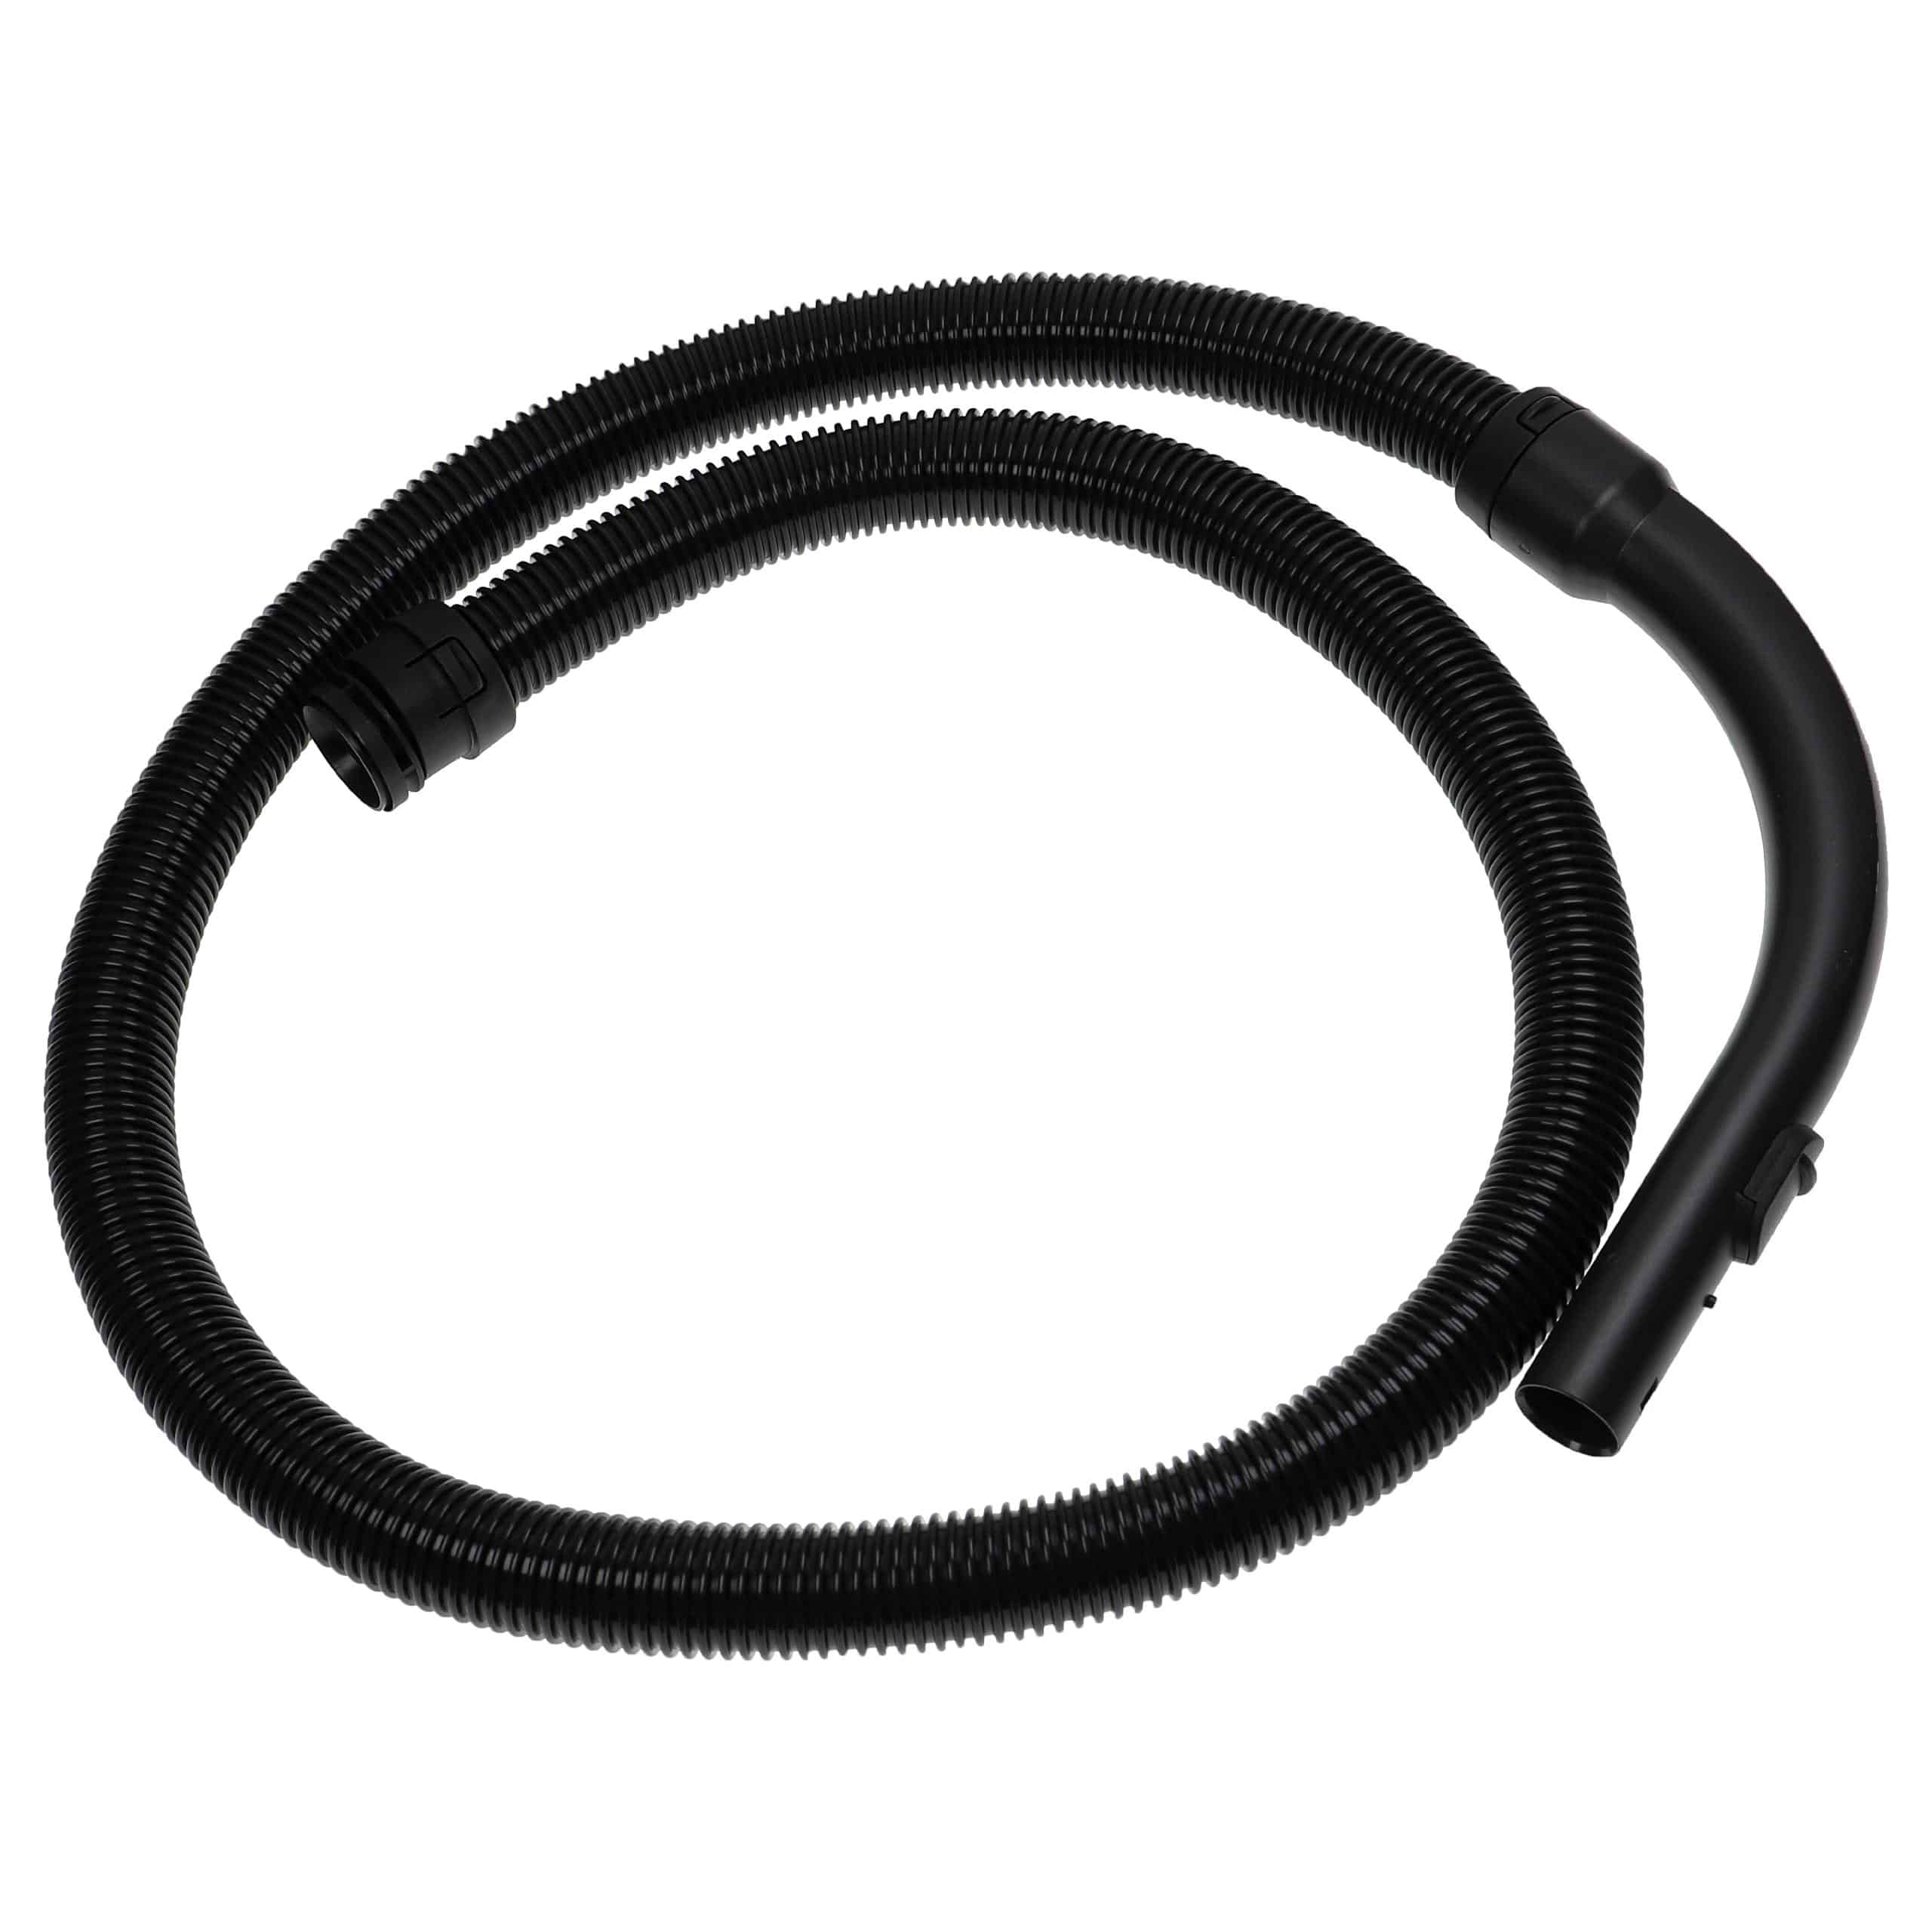 Hose suitable for Miele Complete C3 etc. - with Handle, 1.8 m long